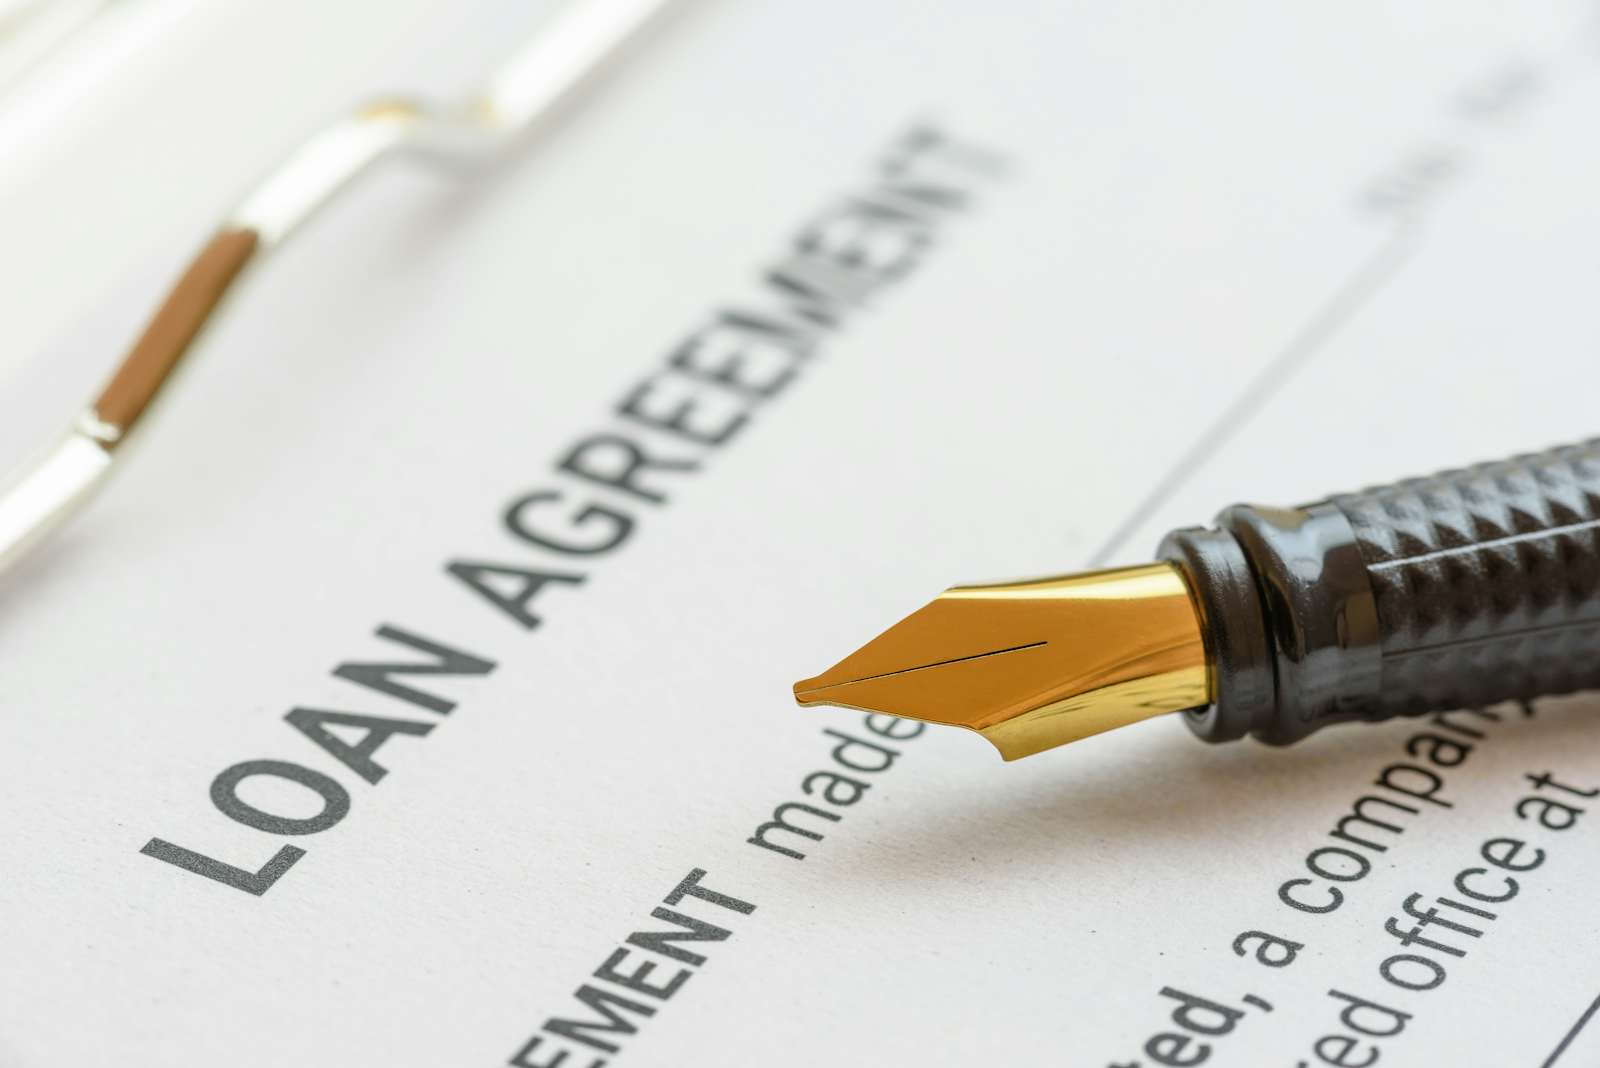 Business loan agreement or legal document